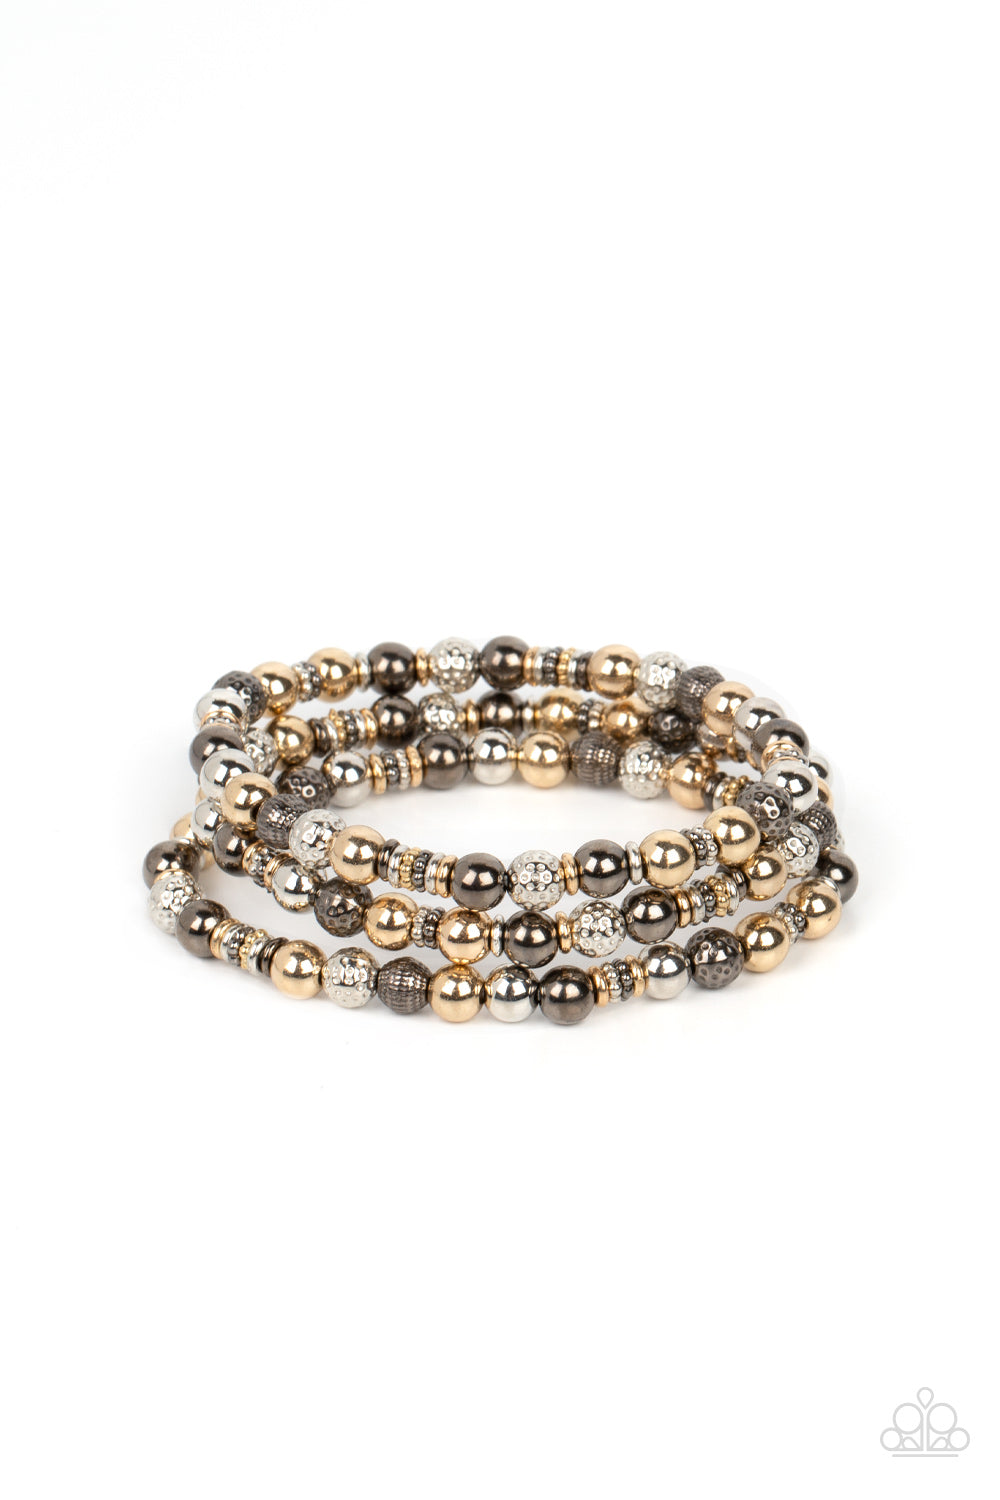 Paparazzi Accessories - Boundless Boundaries - Multi Beaded Bracelets a gritty collection of smooth, studded, and textured gold, gunmetal, and silver beads are threaded along stretchy bands around the wrist, creating dainty layers.  Sold as one set of three bracelets.